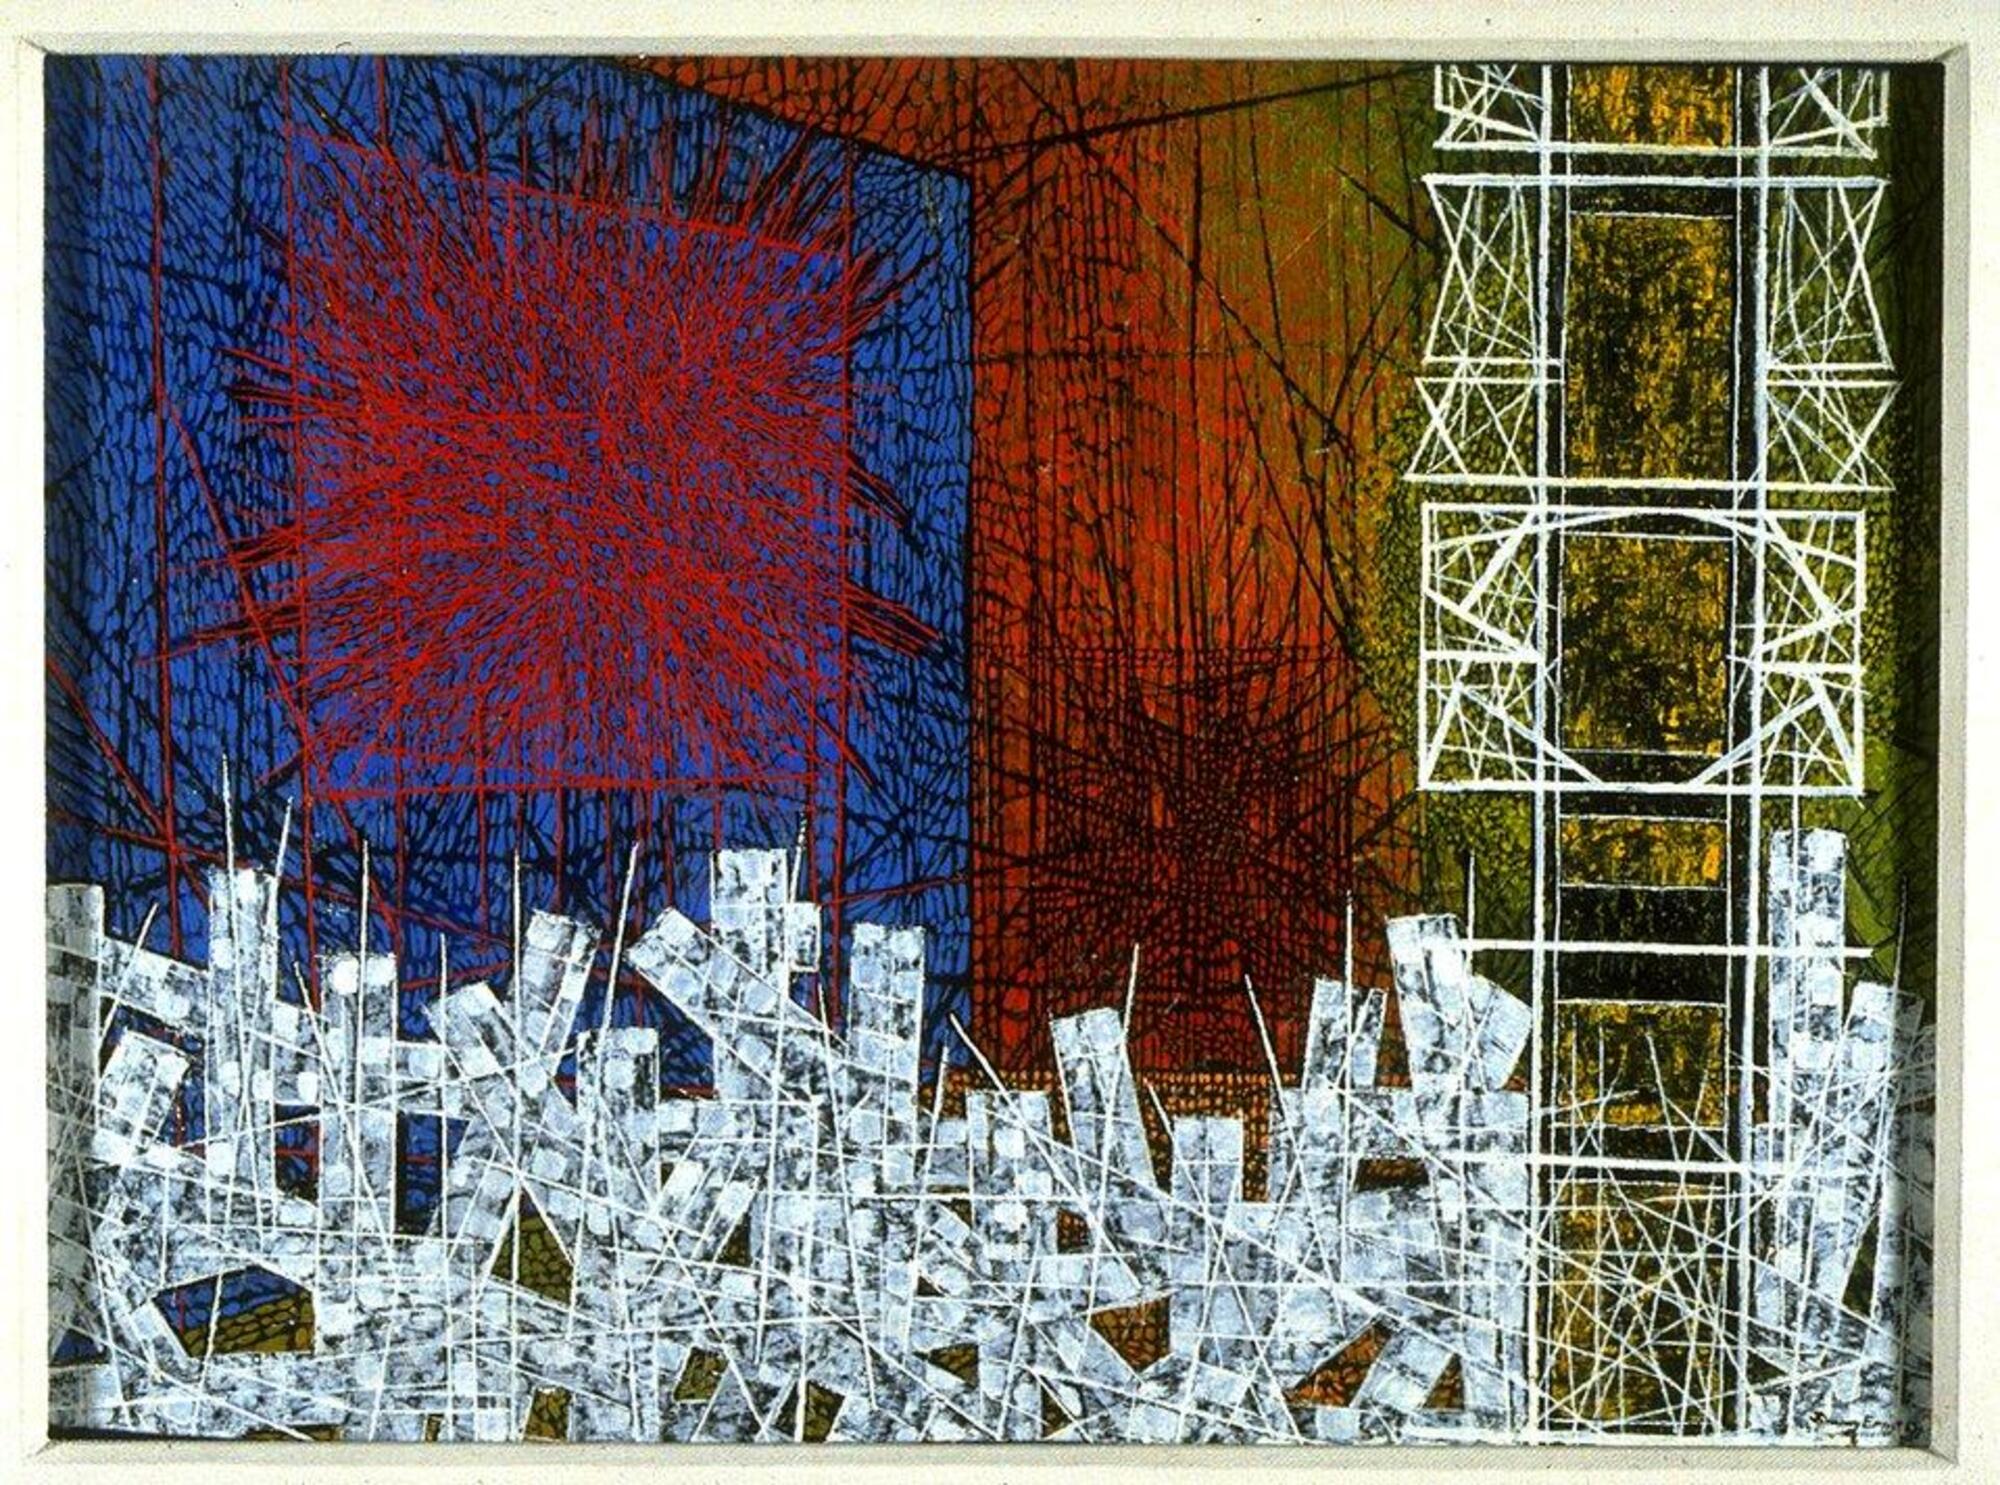 This painting has a large tower of geometric lines and shapes on the right side and and a large square with similar lines on the left side. In the foreground, along the bottom edge of the painting, is an arrangment of rectangles that are criss-crossed with additional lines. Bright blue, red, yellow and white appear throughout the painting.